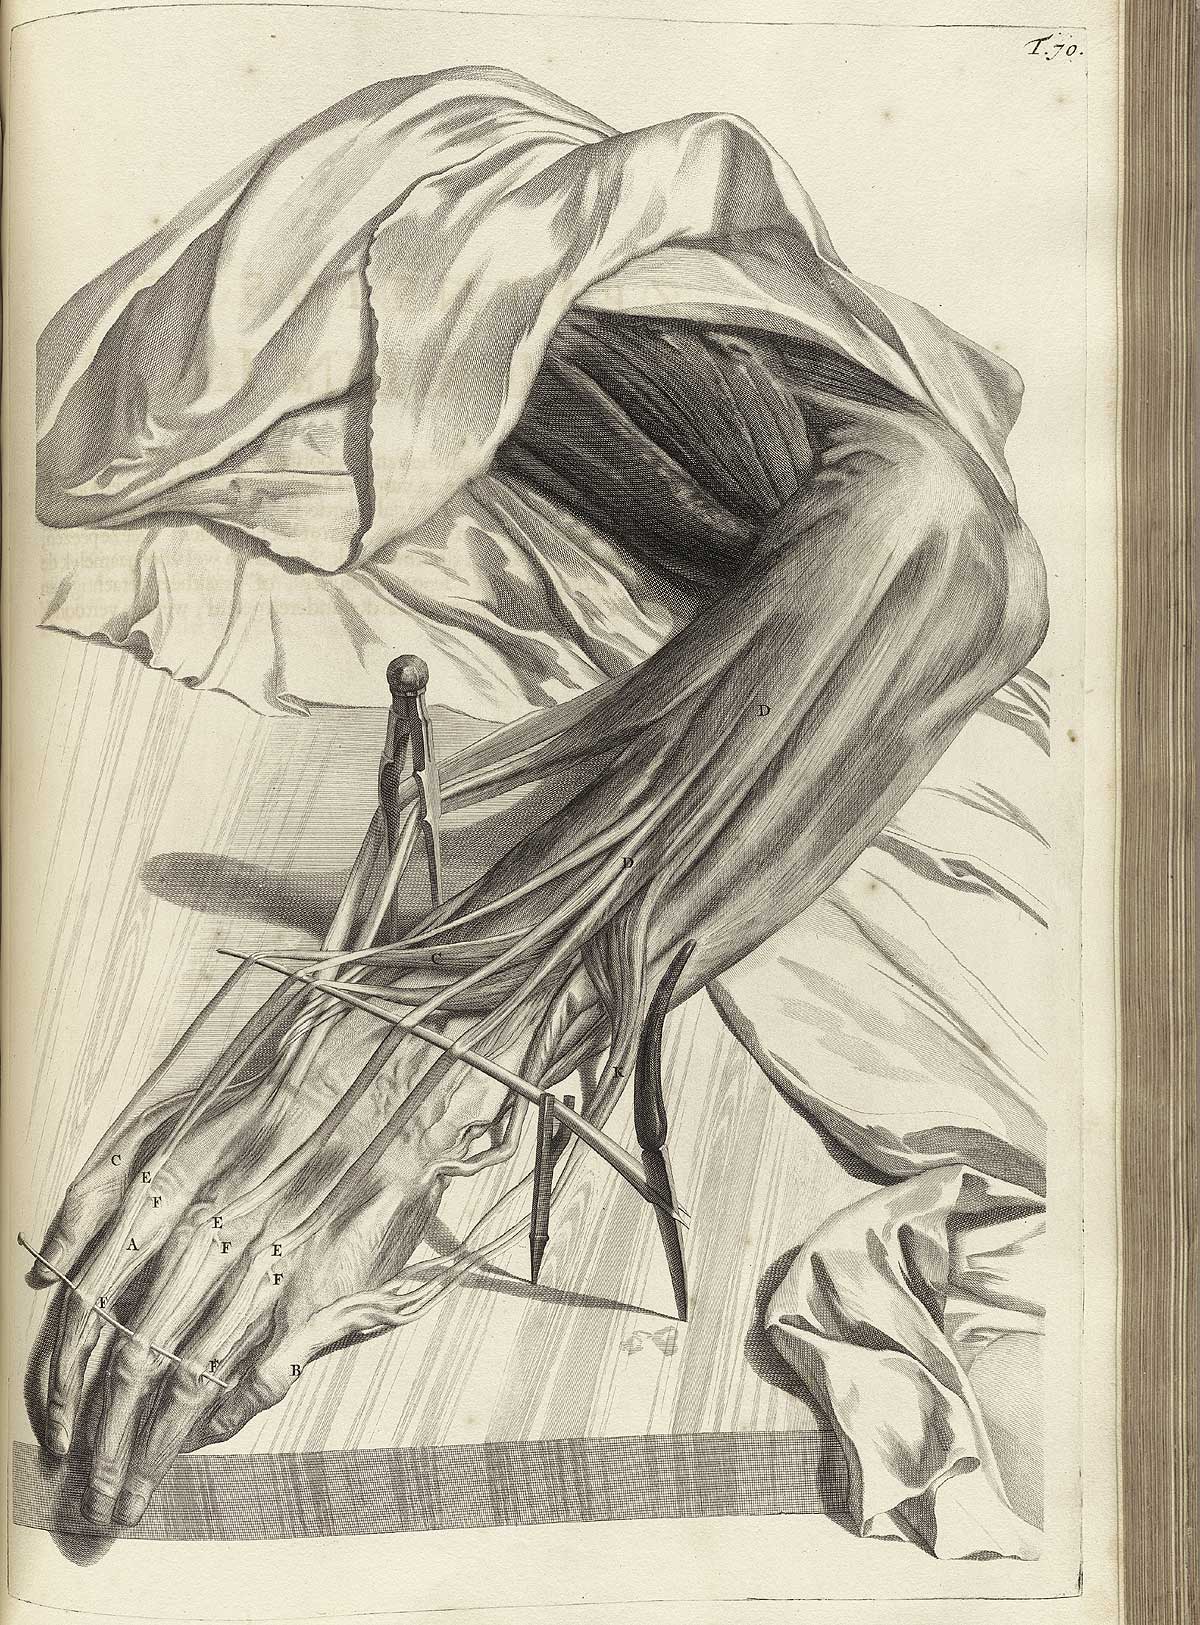 Engraving of a dissected hand with muscles and sinews of the back of the forearm and hand separated with dissecting tools for a detailed view; the forearm and hand are laying in a downward direction and pinned to a wooden board; from Govard Bidloo’s Ontleding Des Menschelyken Lichaams, Amsterdam, 1690, NLM Call no. WZ 250 B5855anDu 1690.